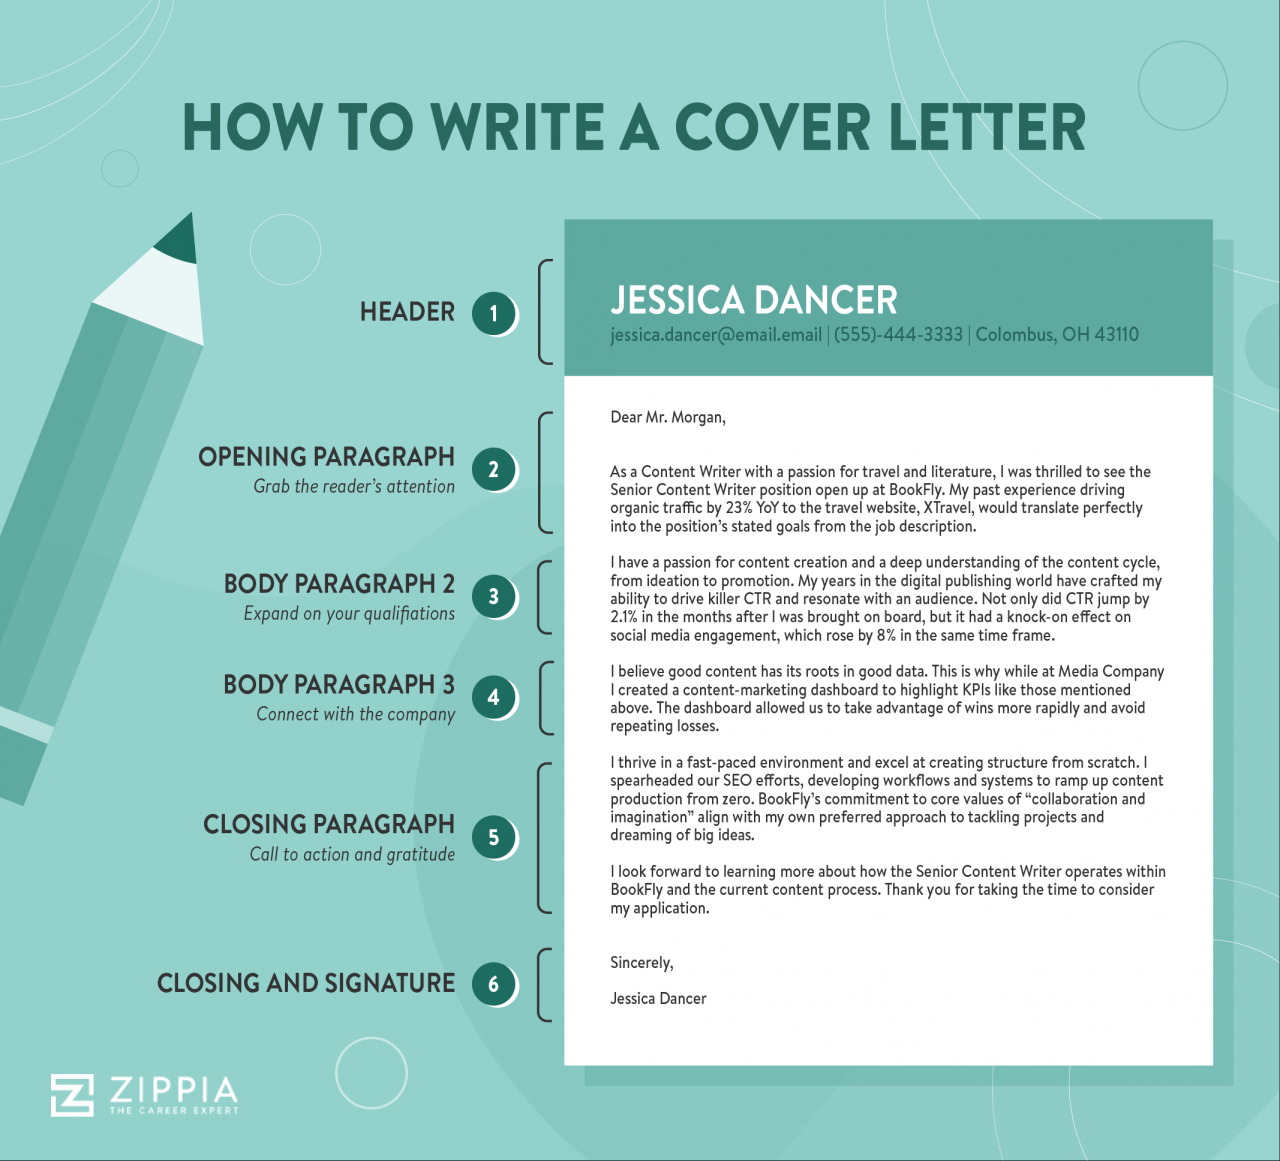 How to write a cover letter for an application